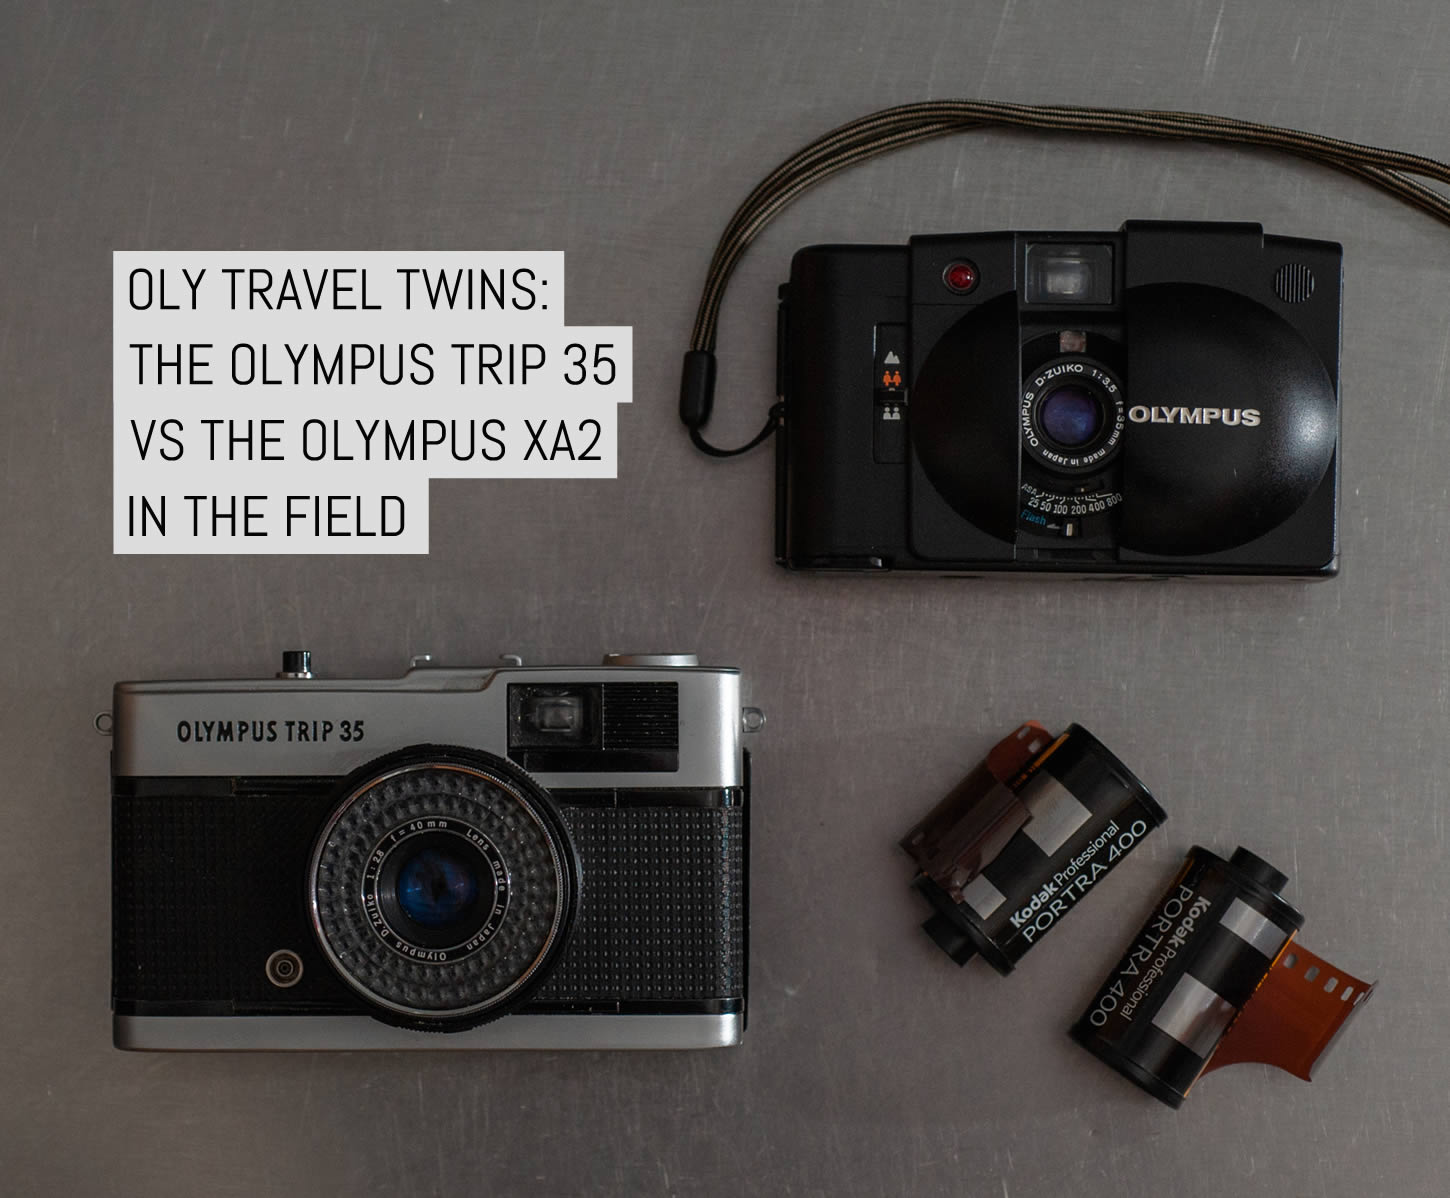 Oly travel twins: The Olympus Trip 35 vs the Olympus XA2 in the field